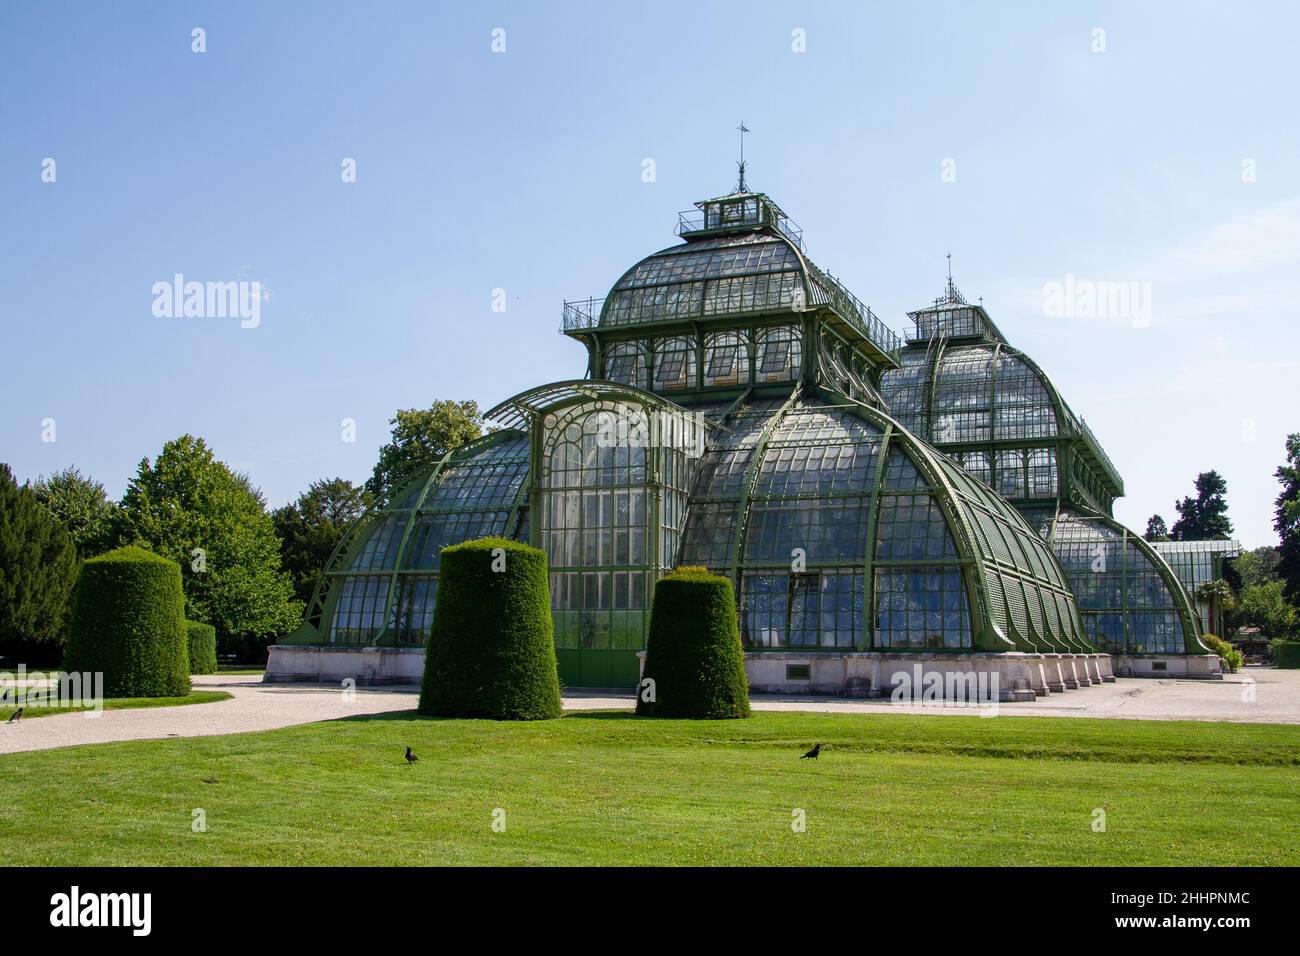 Vienna, Austria, July 22, 2021. The Palmenhaus Schonbrunn is a large greenhouse with plants from all over the world. There are four greenhouses in tot Stock Photo